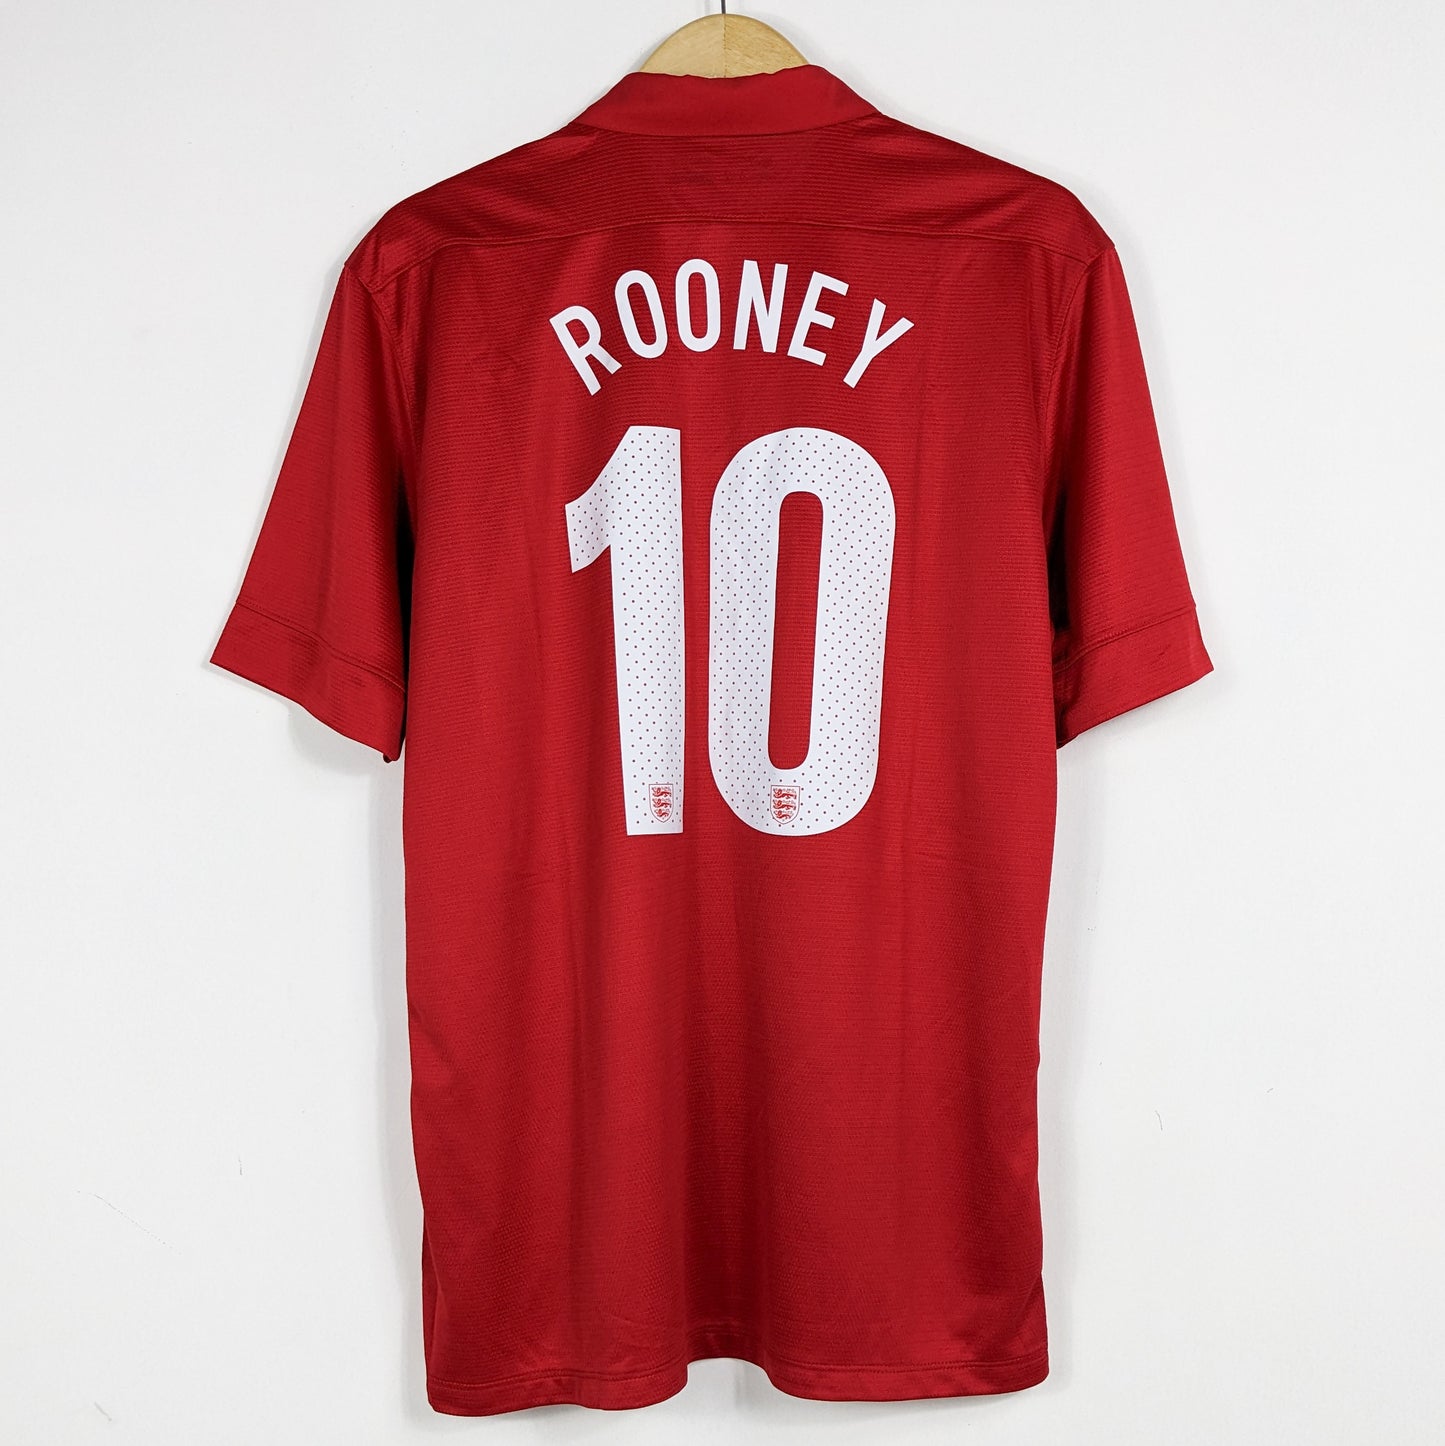 Authentic England 2013 Away - Rooney #10 Size L (Bnwt) (Anniversary 150th)